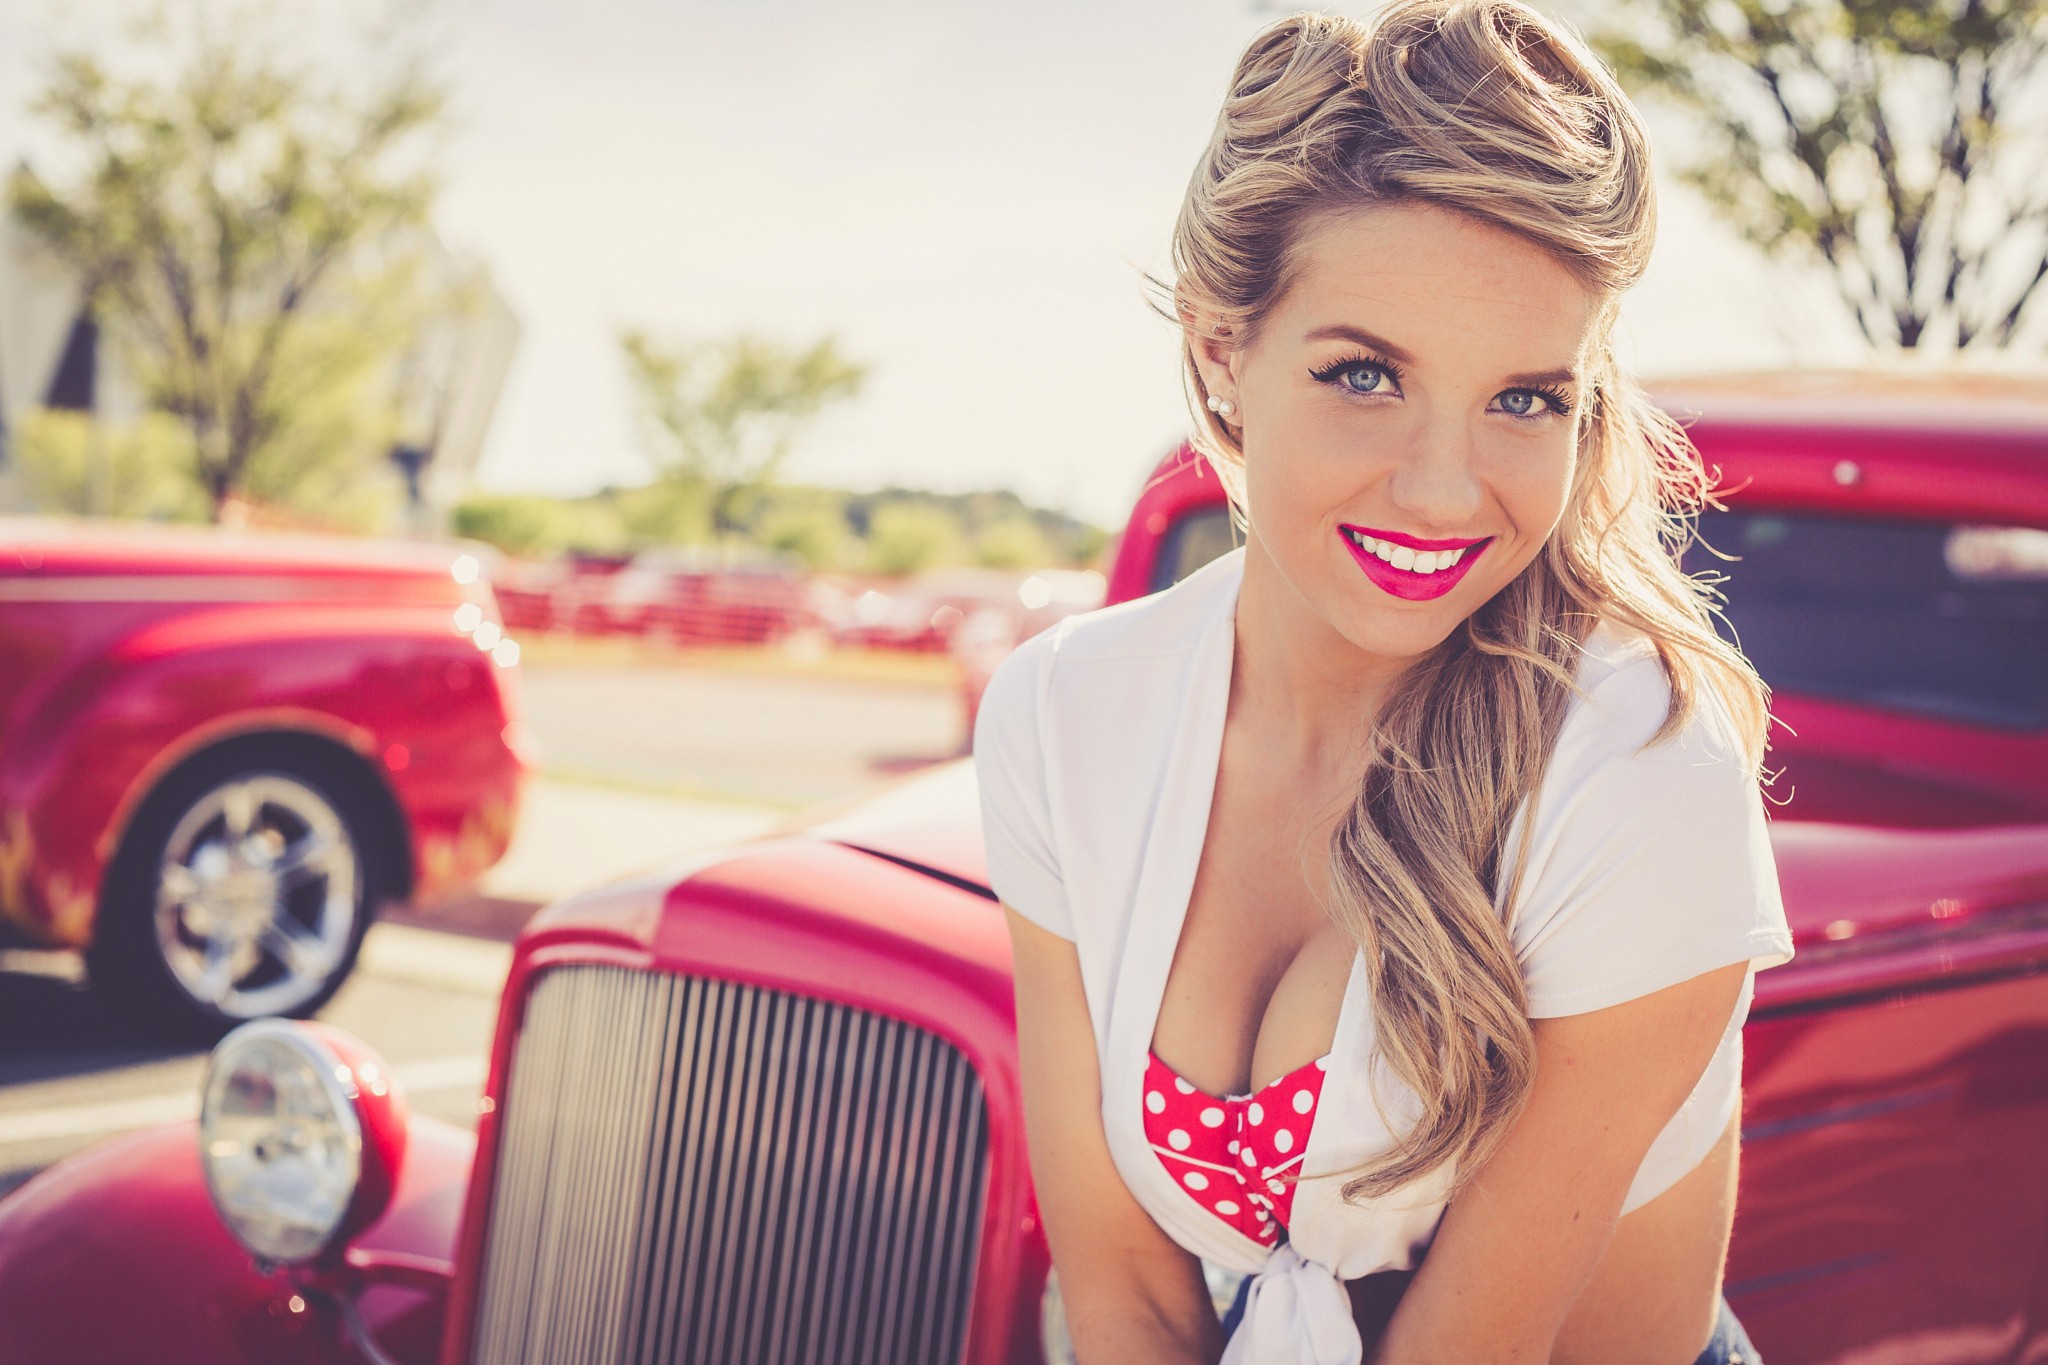 People 2048x1365 women pinup models red lipstick blonde red cars old car smiling open mouth women with cars model pearl earrings retro style car vehicle makeup looking at viewer boobs